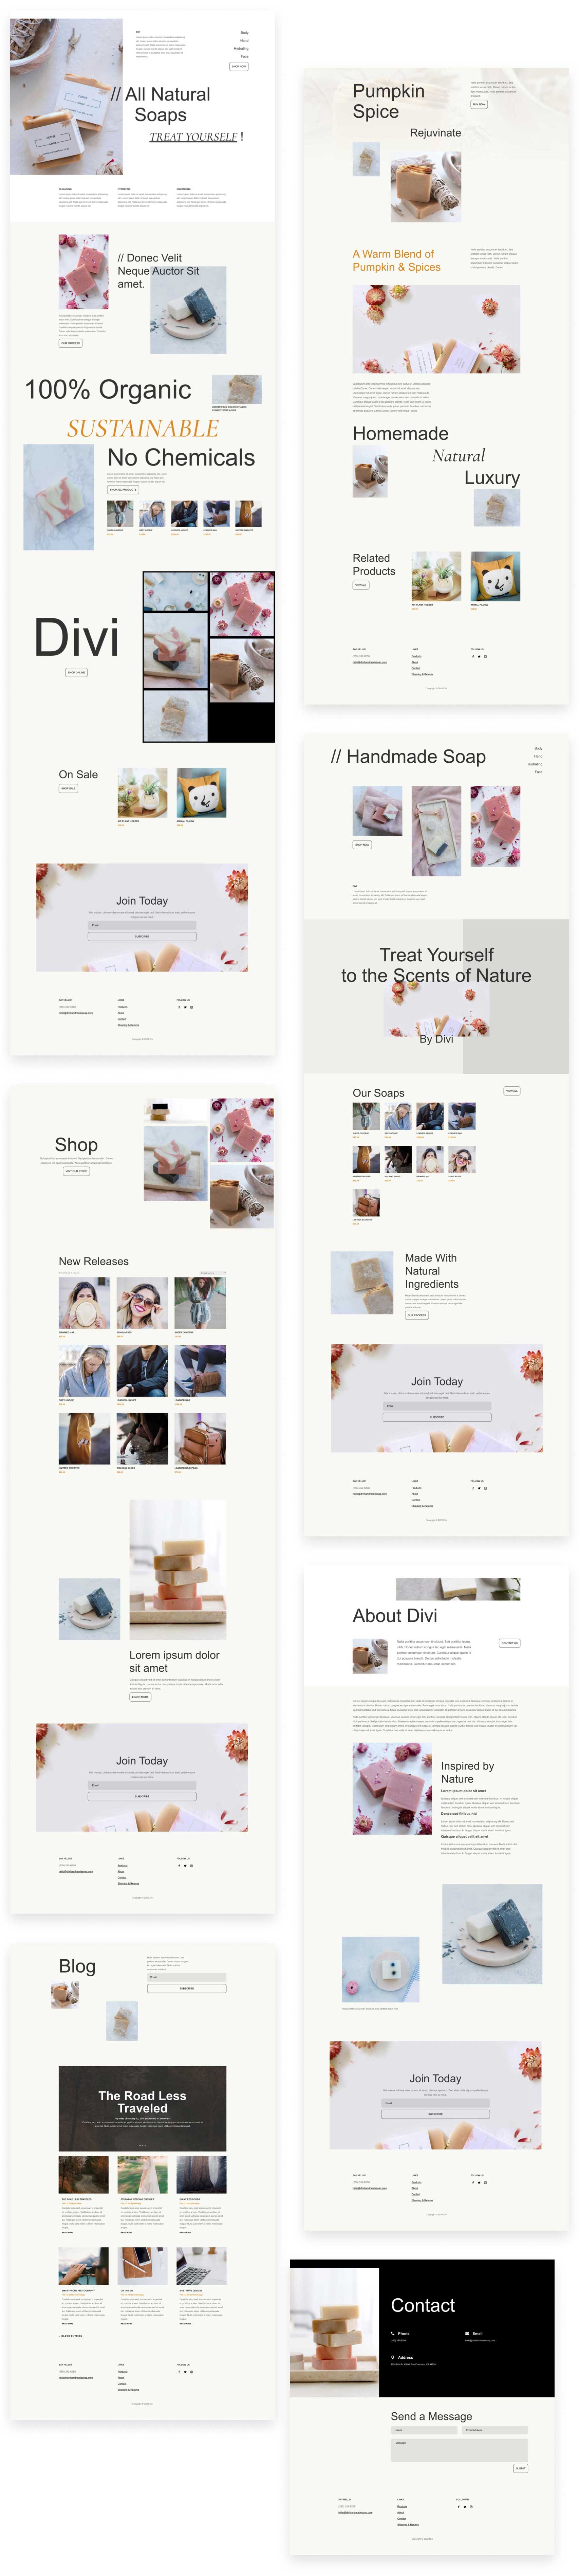 Handmade Soap layout pack for Divi